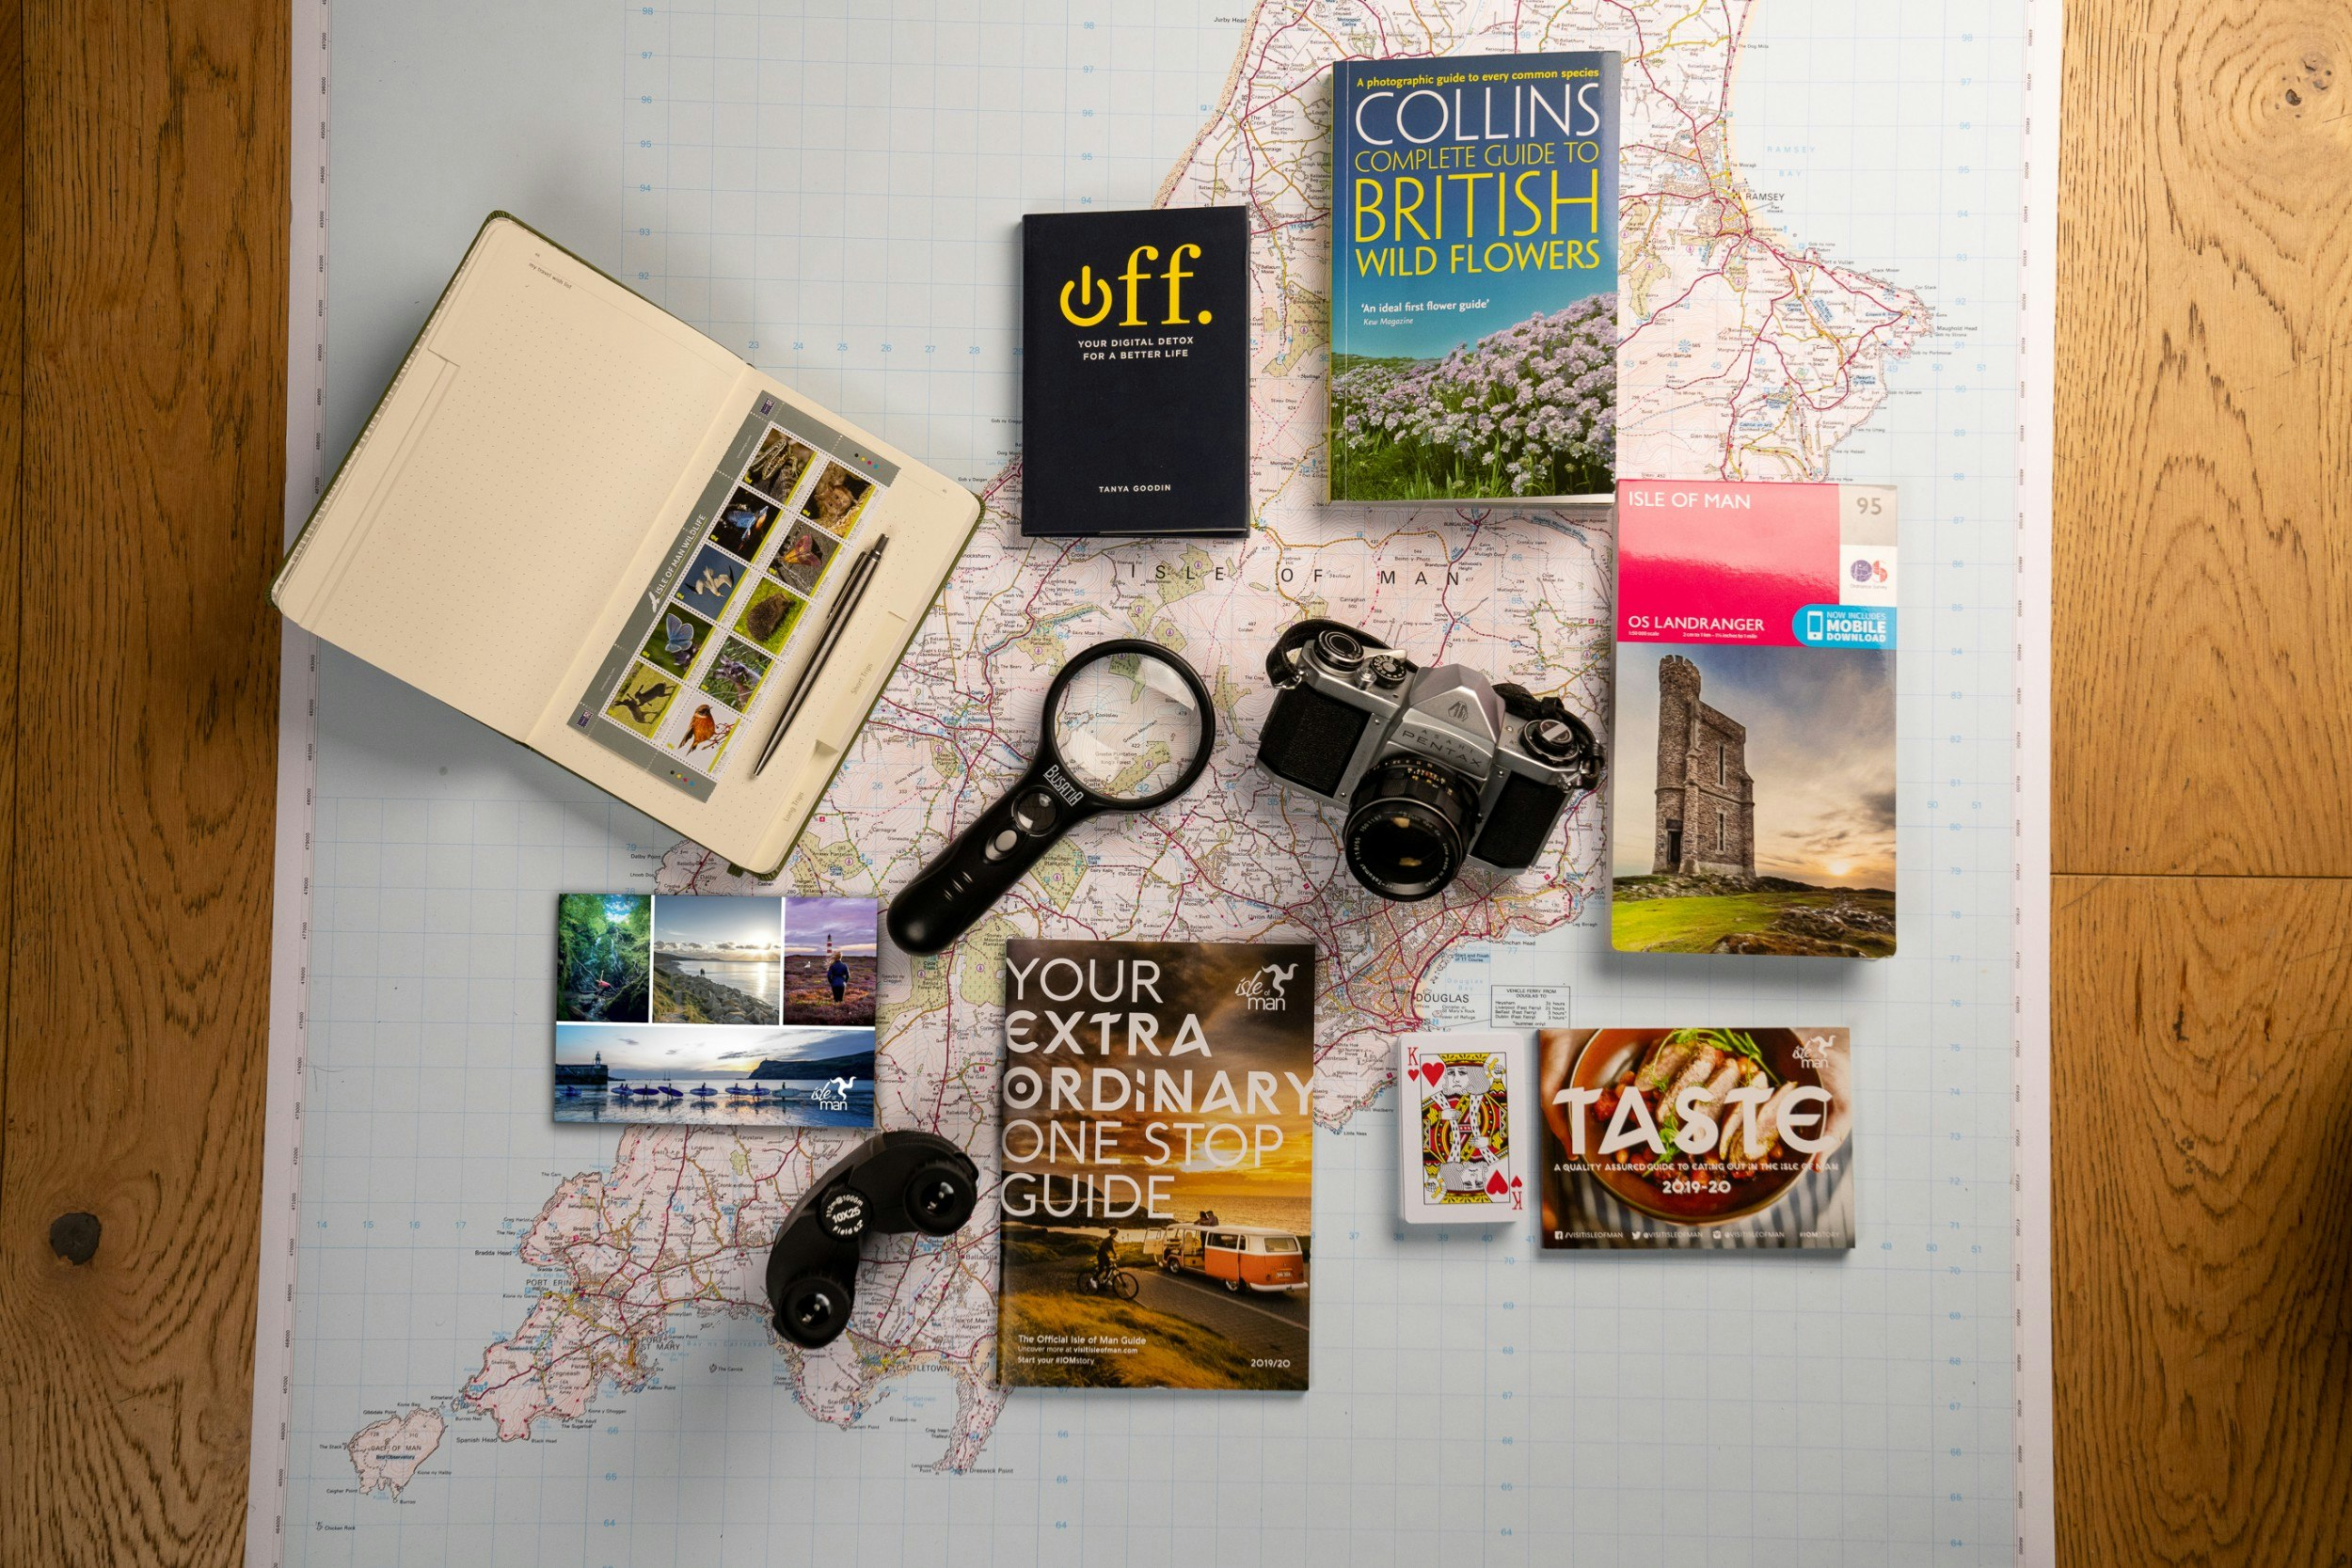 A map of the Isle of man, a camera and books